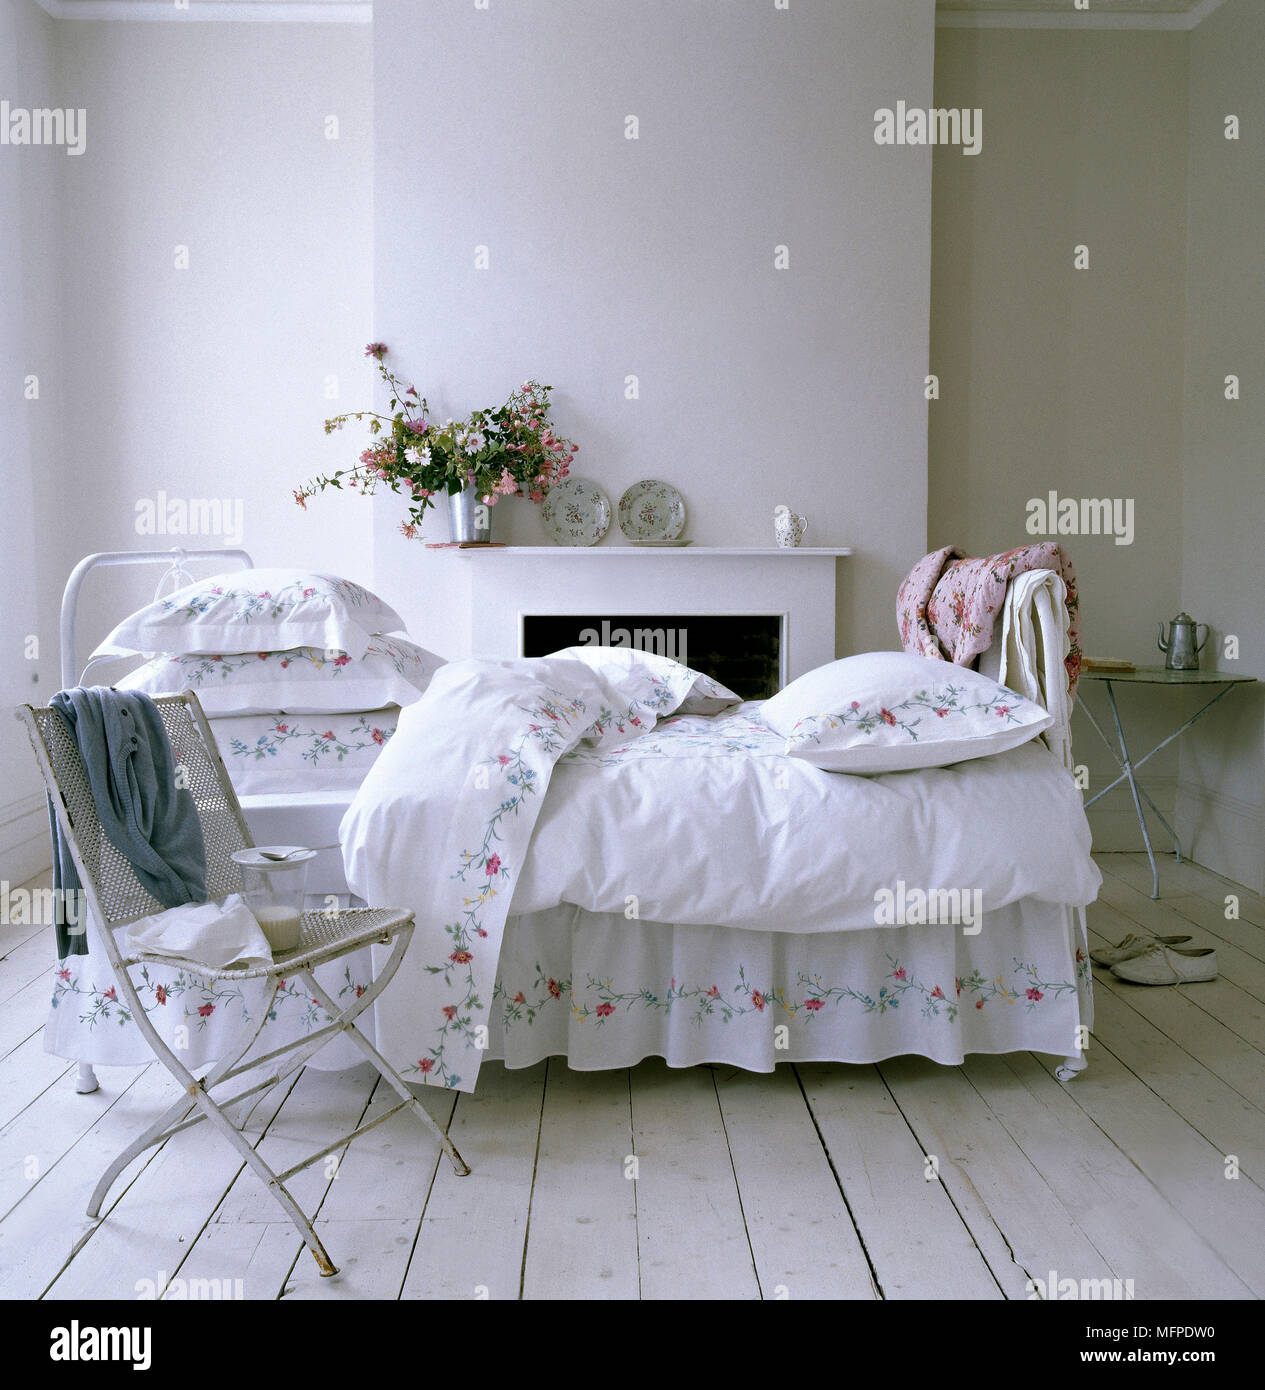 Neutral country bedroom with painted wood floor, wrought iron bed, floral linen, fireplace, and metal folding chair. Stock Photo